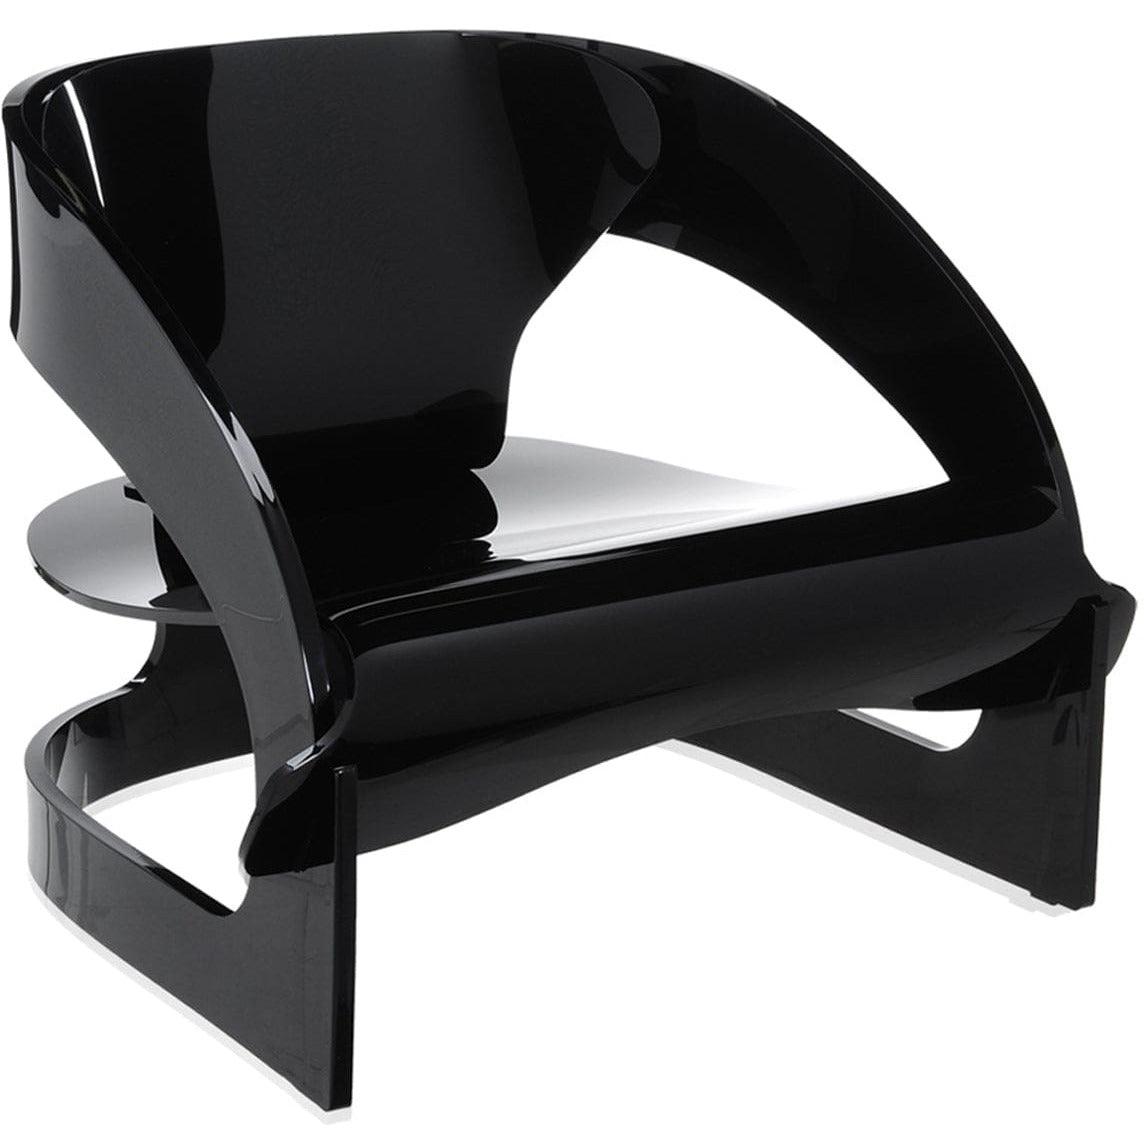 Joe Colombo Low Accent Chair - Curated - Furniture - Kartell